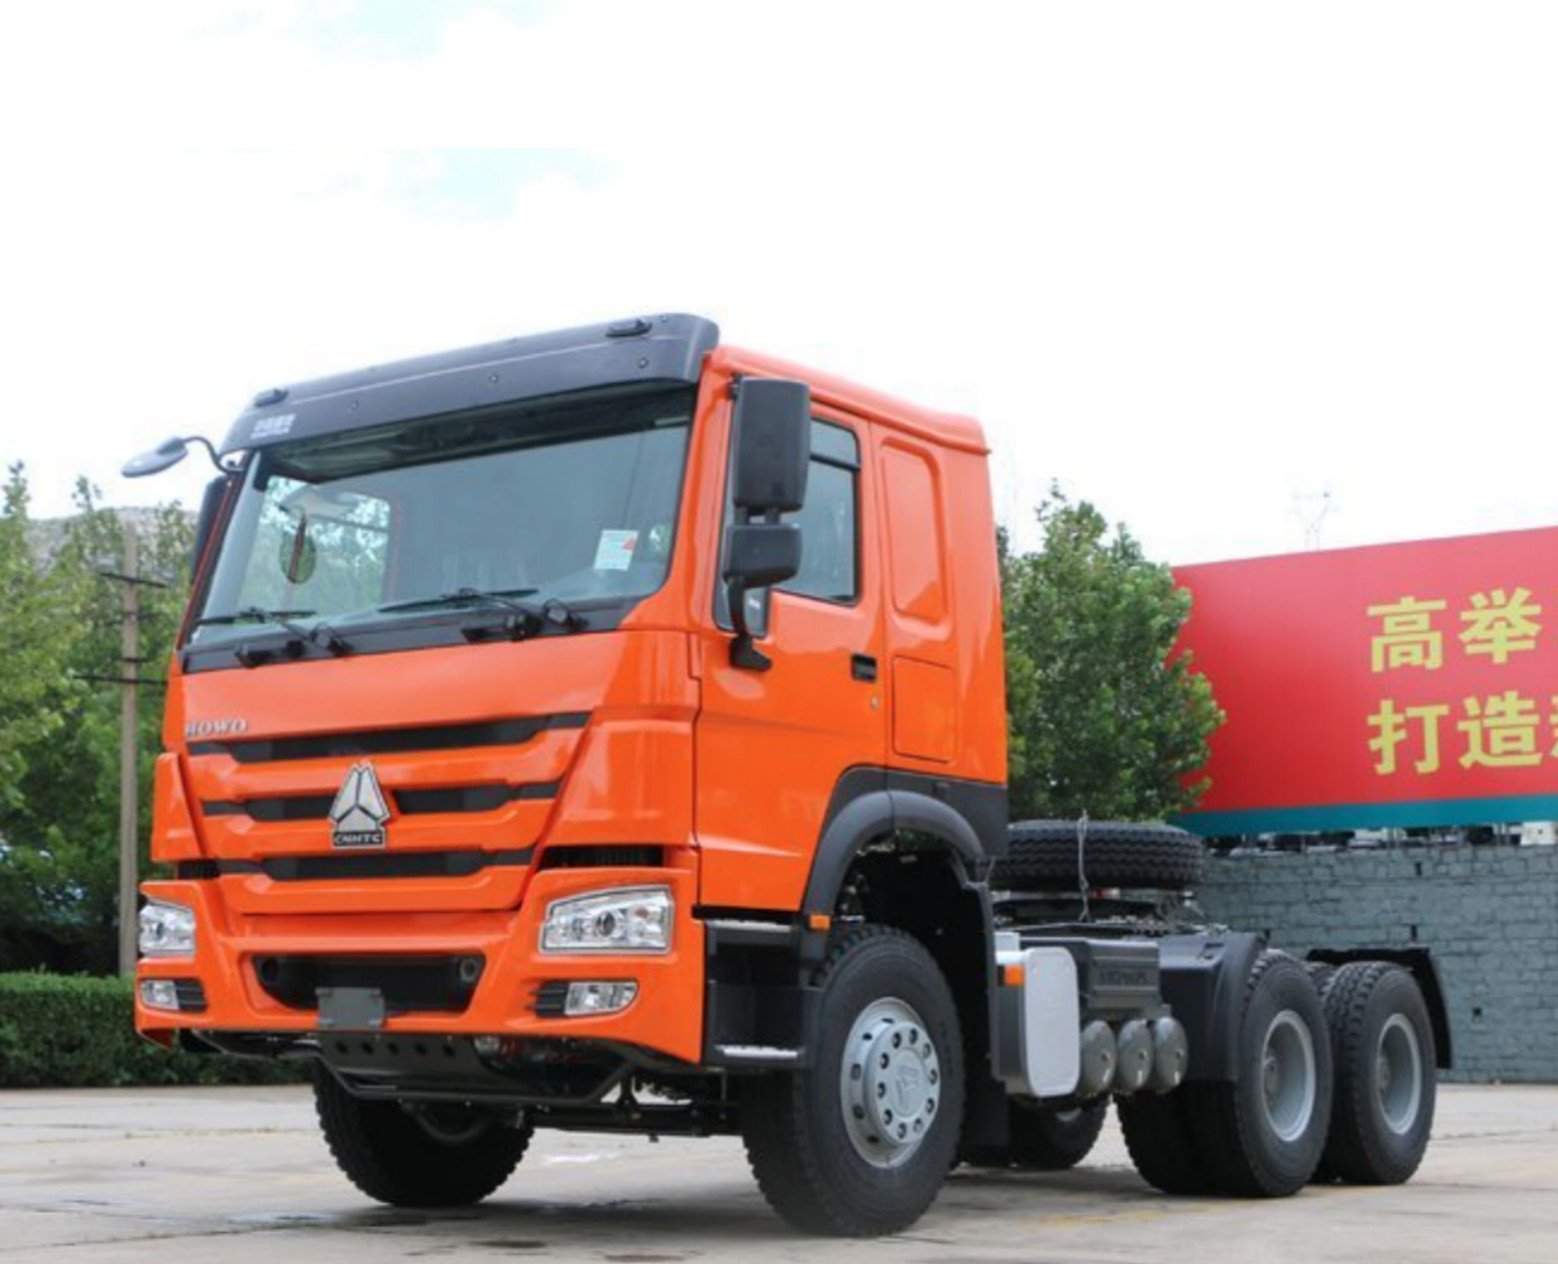 Cheap SINOTRUK HOWO 6x4 tractor truck for sale